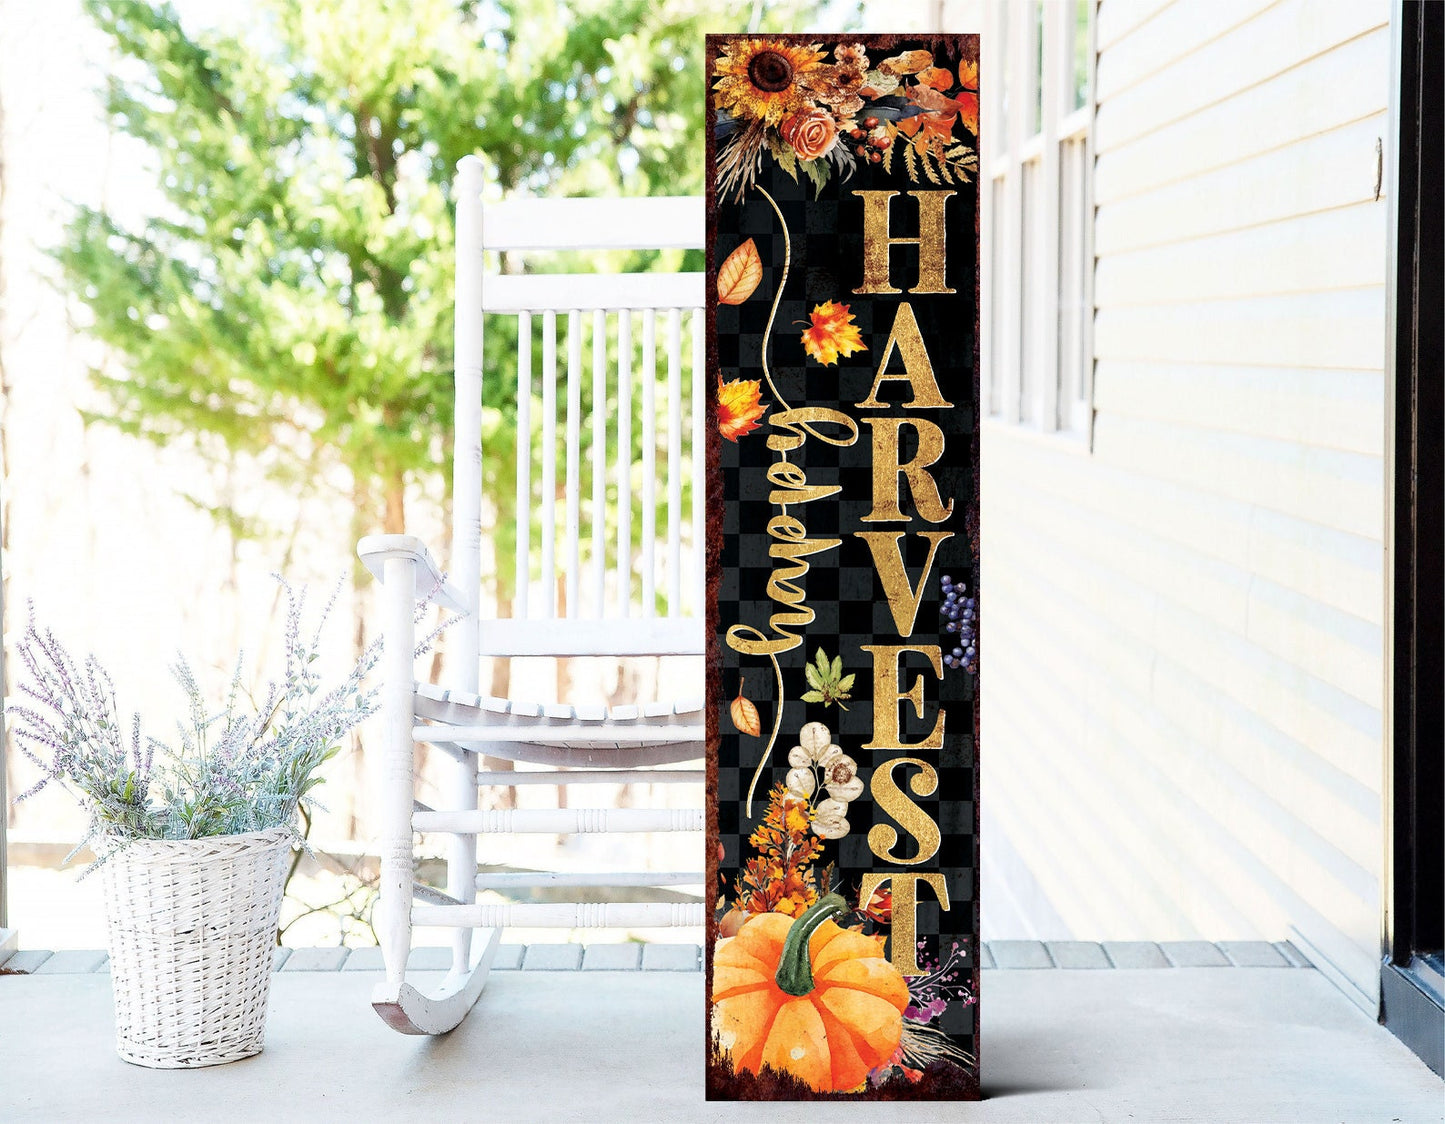 36in Fall Porch Sign - Happy Harvest Vintage Autumn Decor - Rustic Modern Farmhouse Entryway - Made in USA